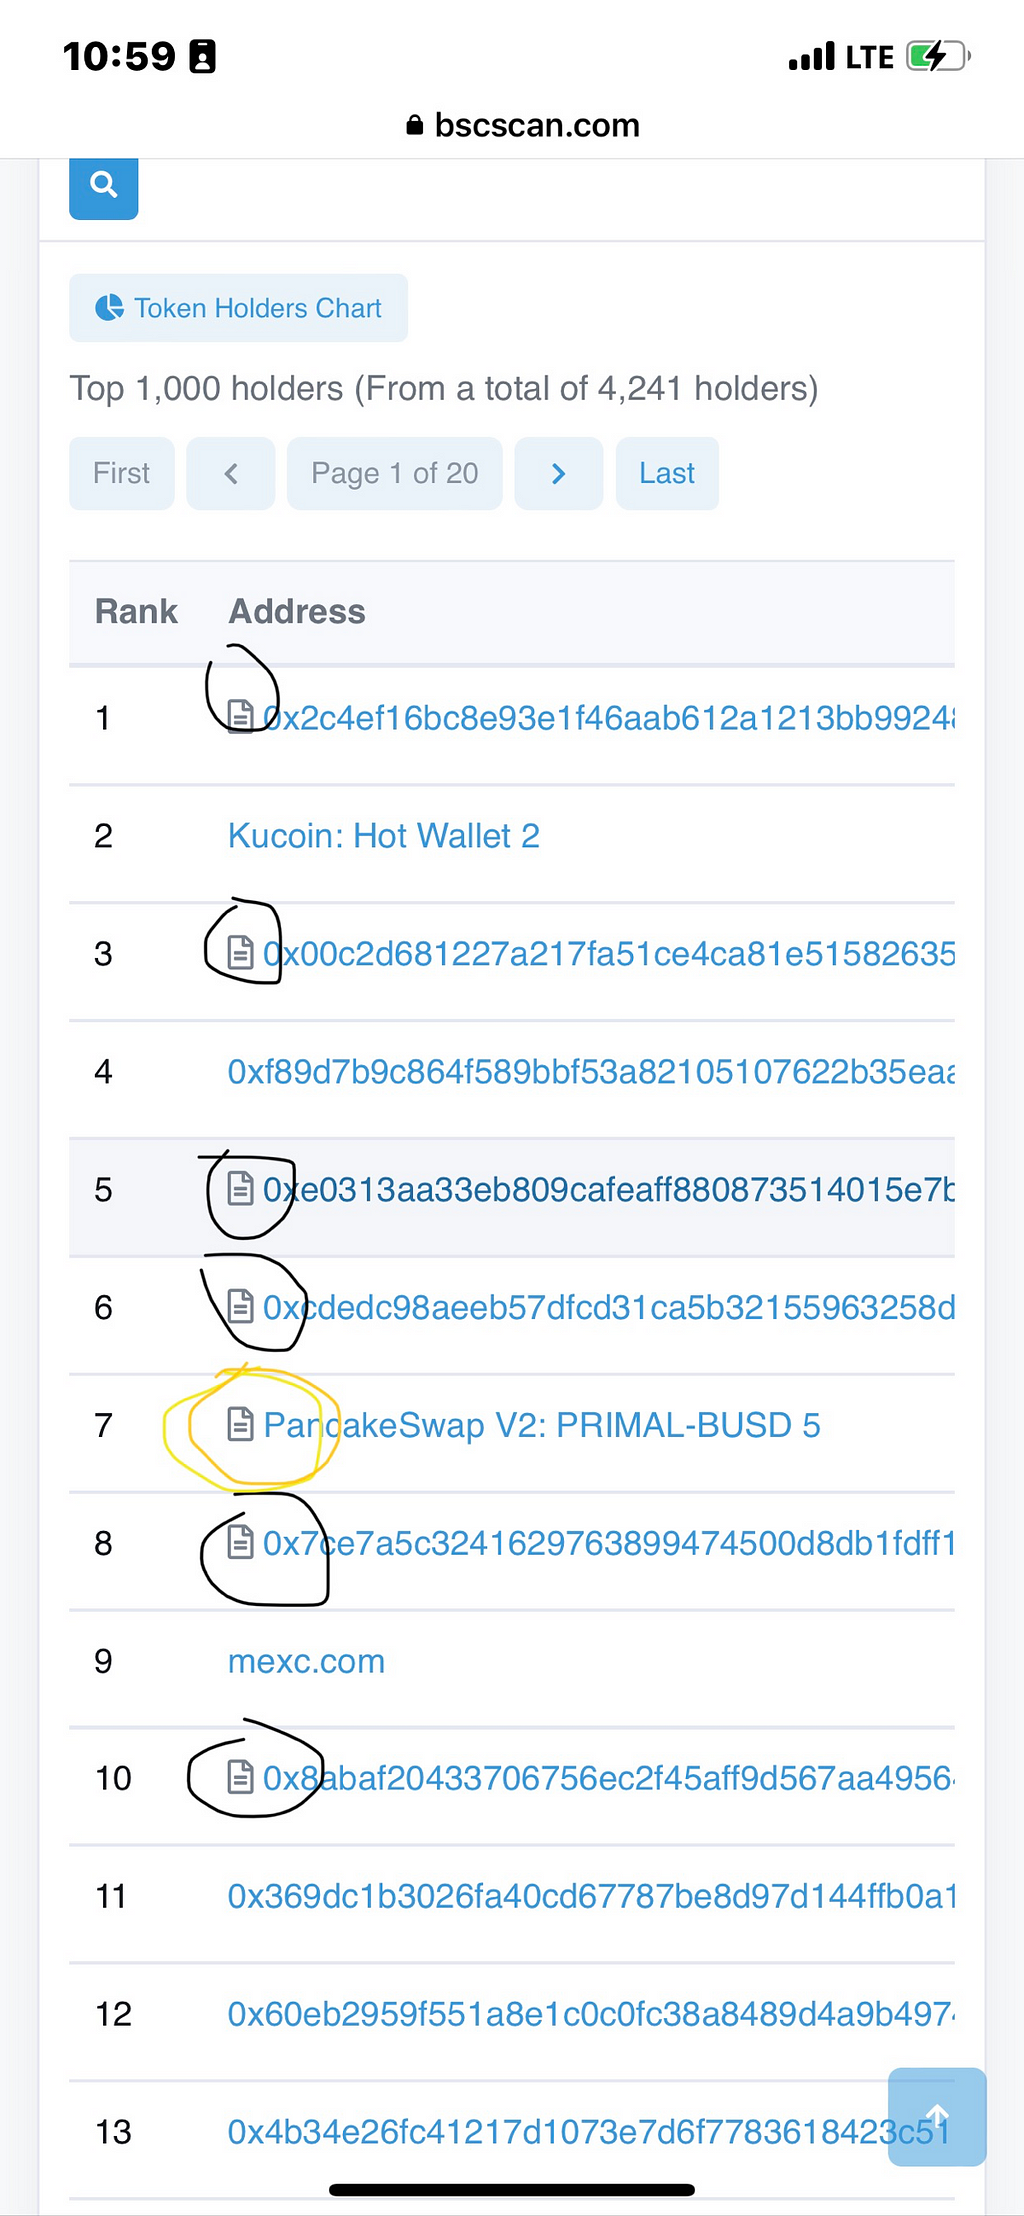 The circle icons means that contract is locked for a period of time….. The 7th contract “Pancakeswap V2: PRIMAL-BUSD5” is the main liquidity contract Pancakeswap DEX